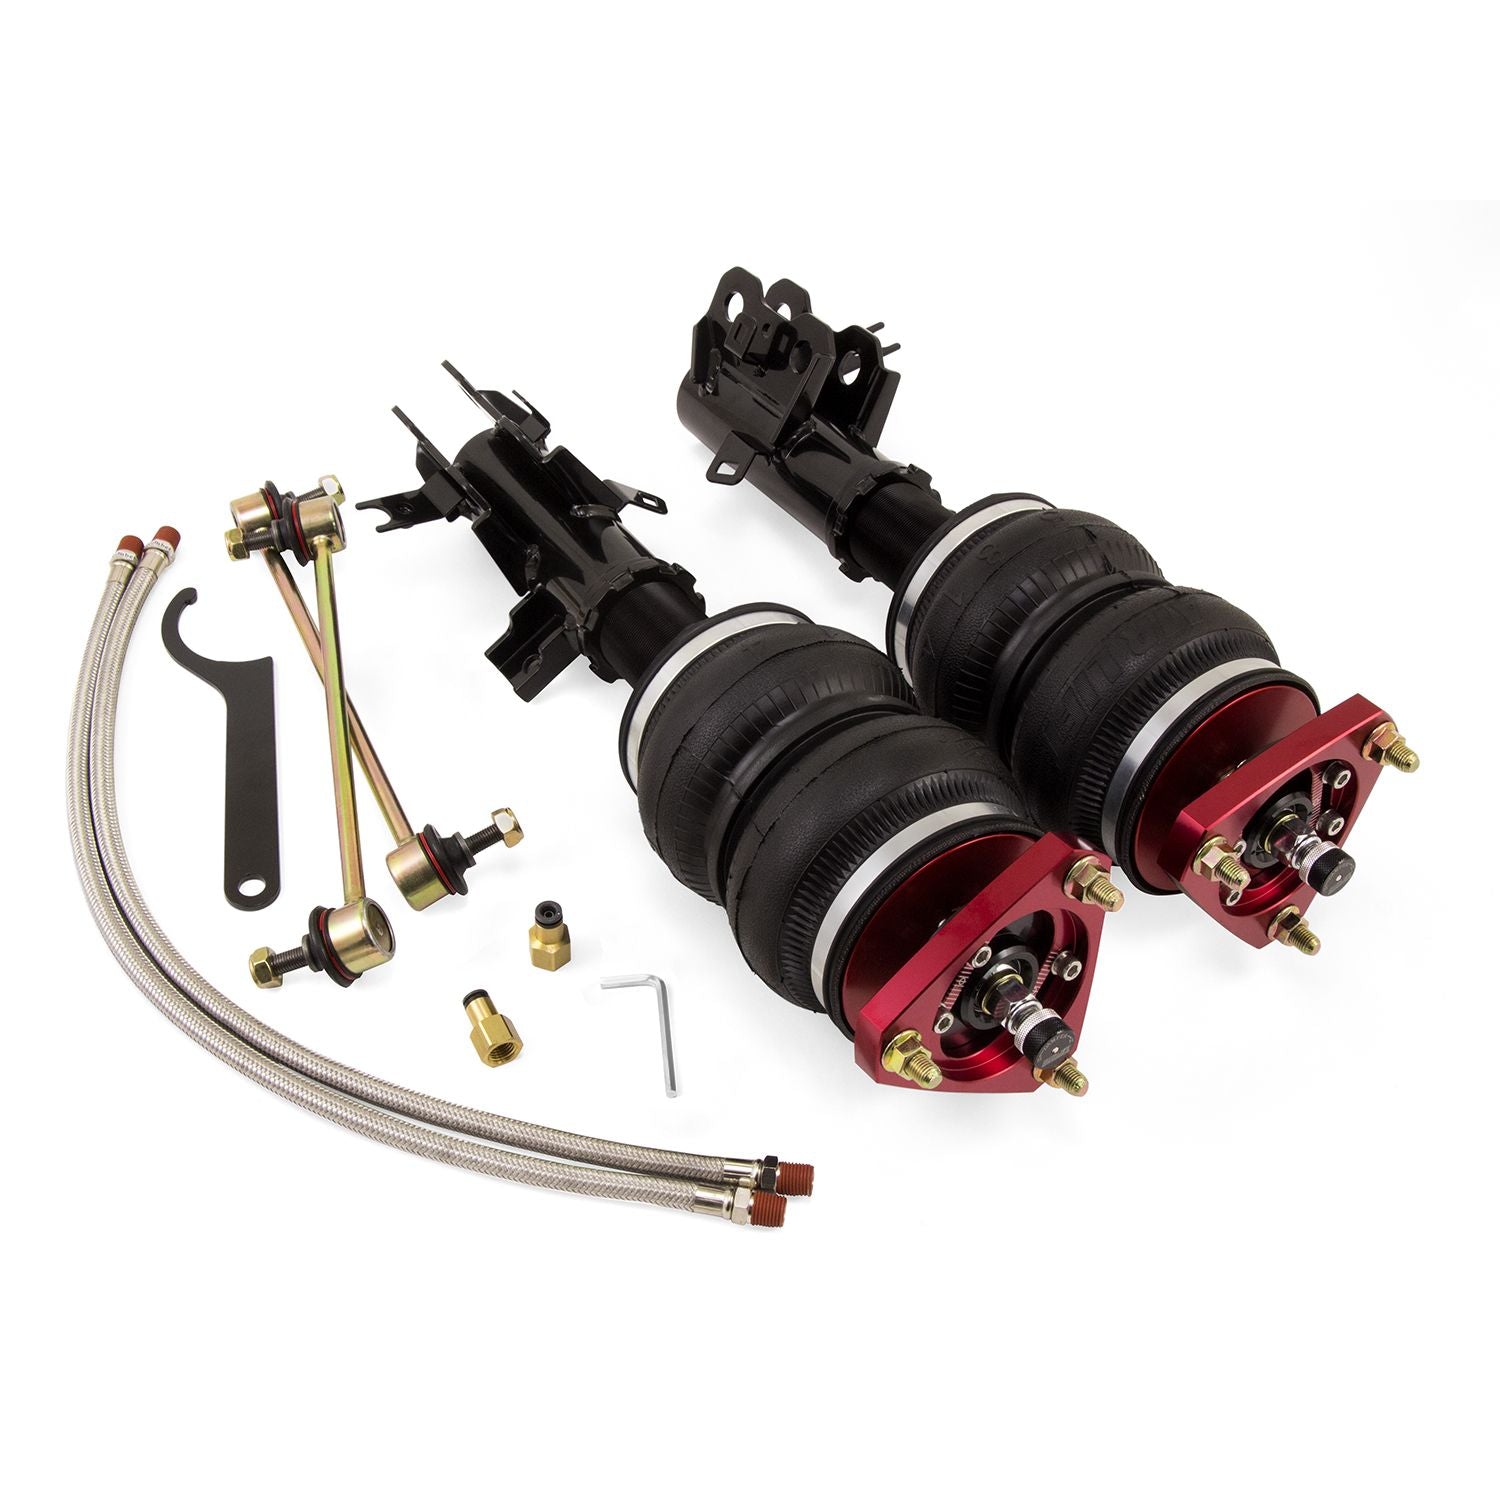 It's time to revolutionize your Honda Civic Si experience and begin your #lifeonair with Air Lift Performance! Our air suspension will get you the maximum drop superior handling sharp steering response and a comfortable ride.